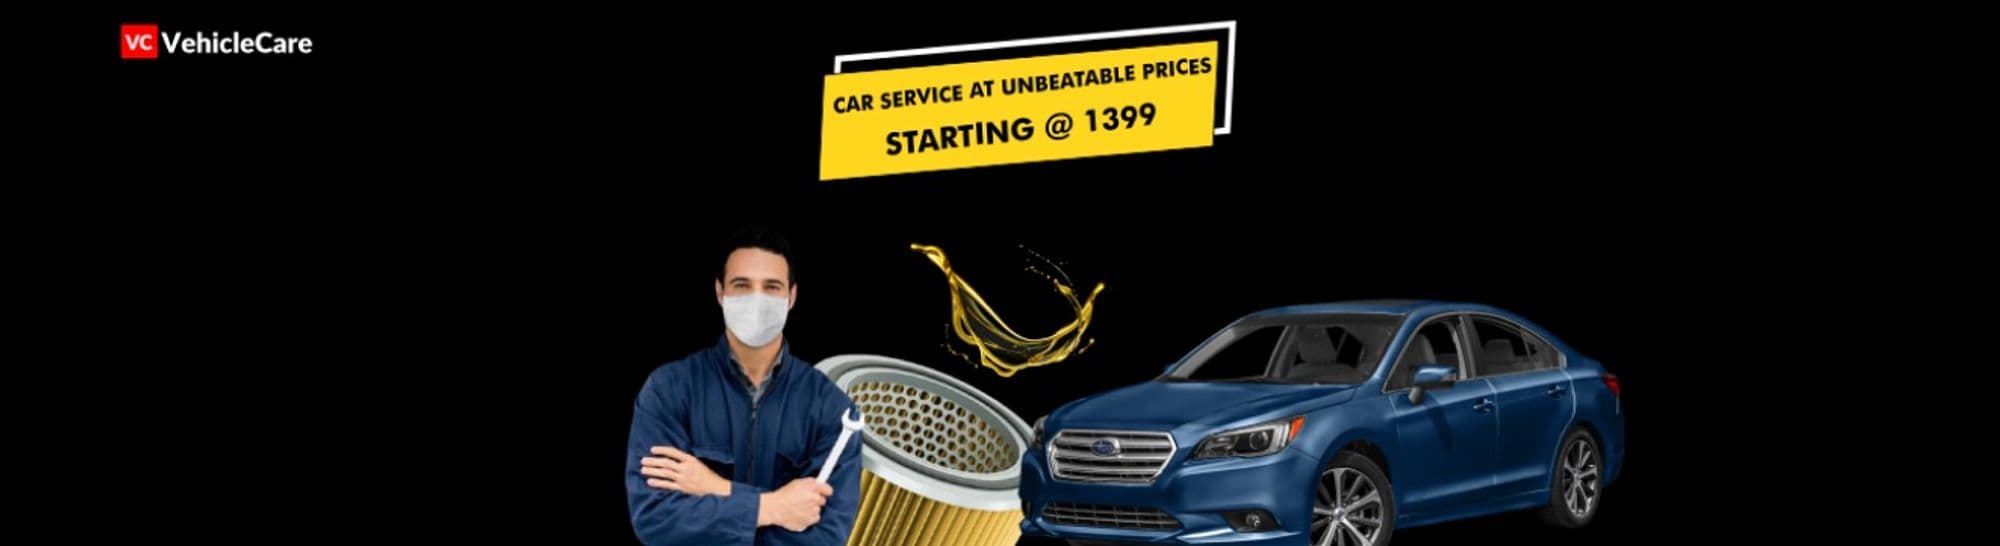 Vehiclecare Cover Image